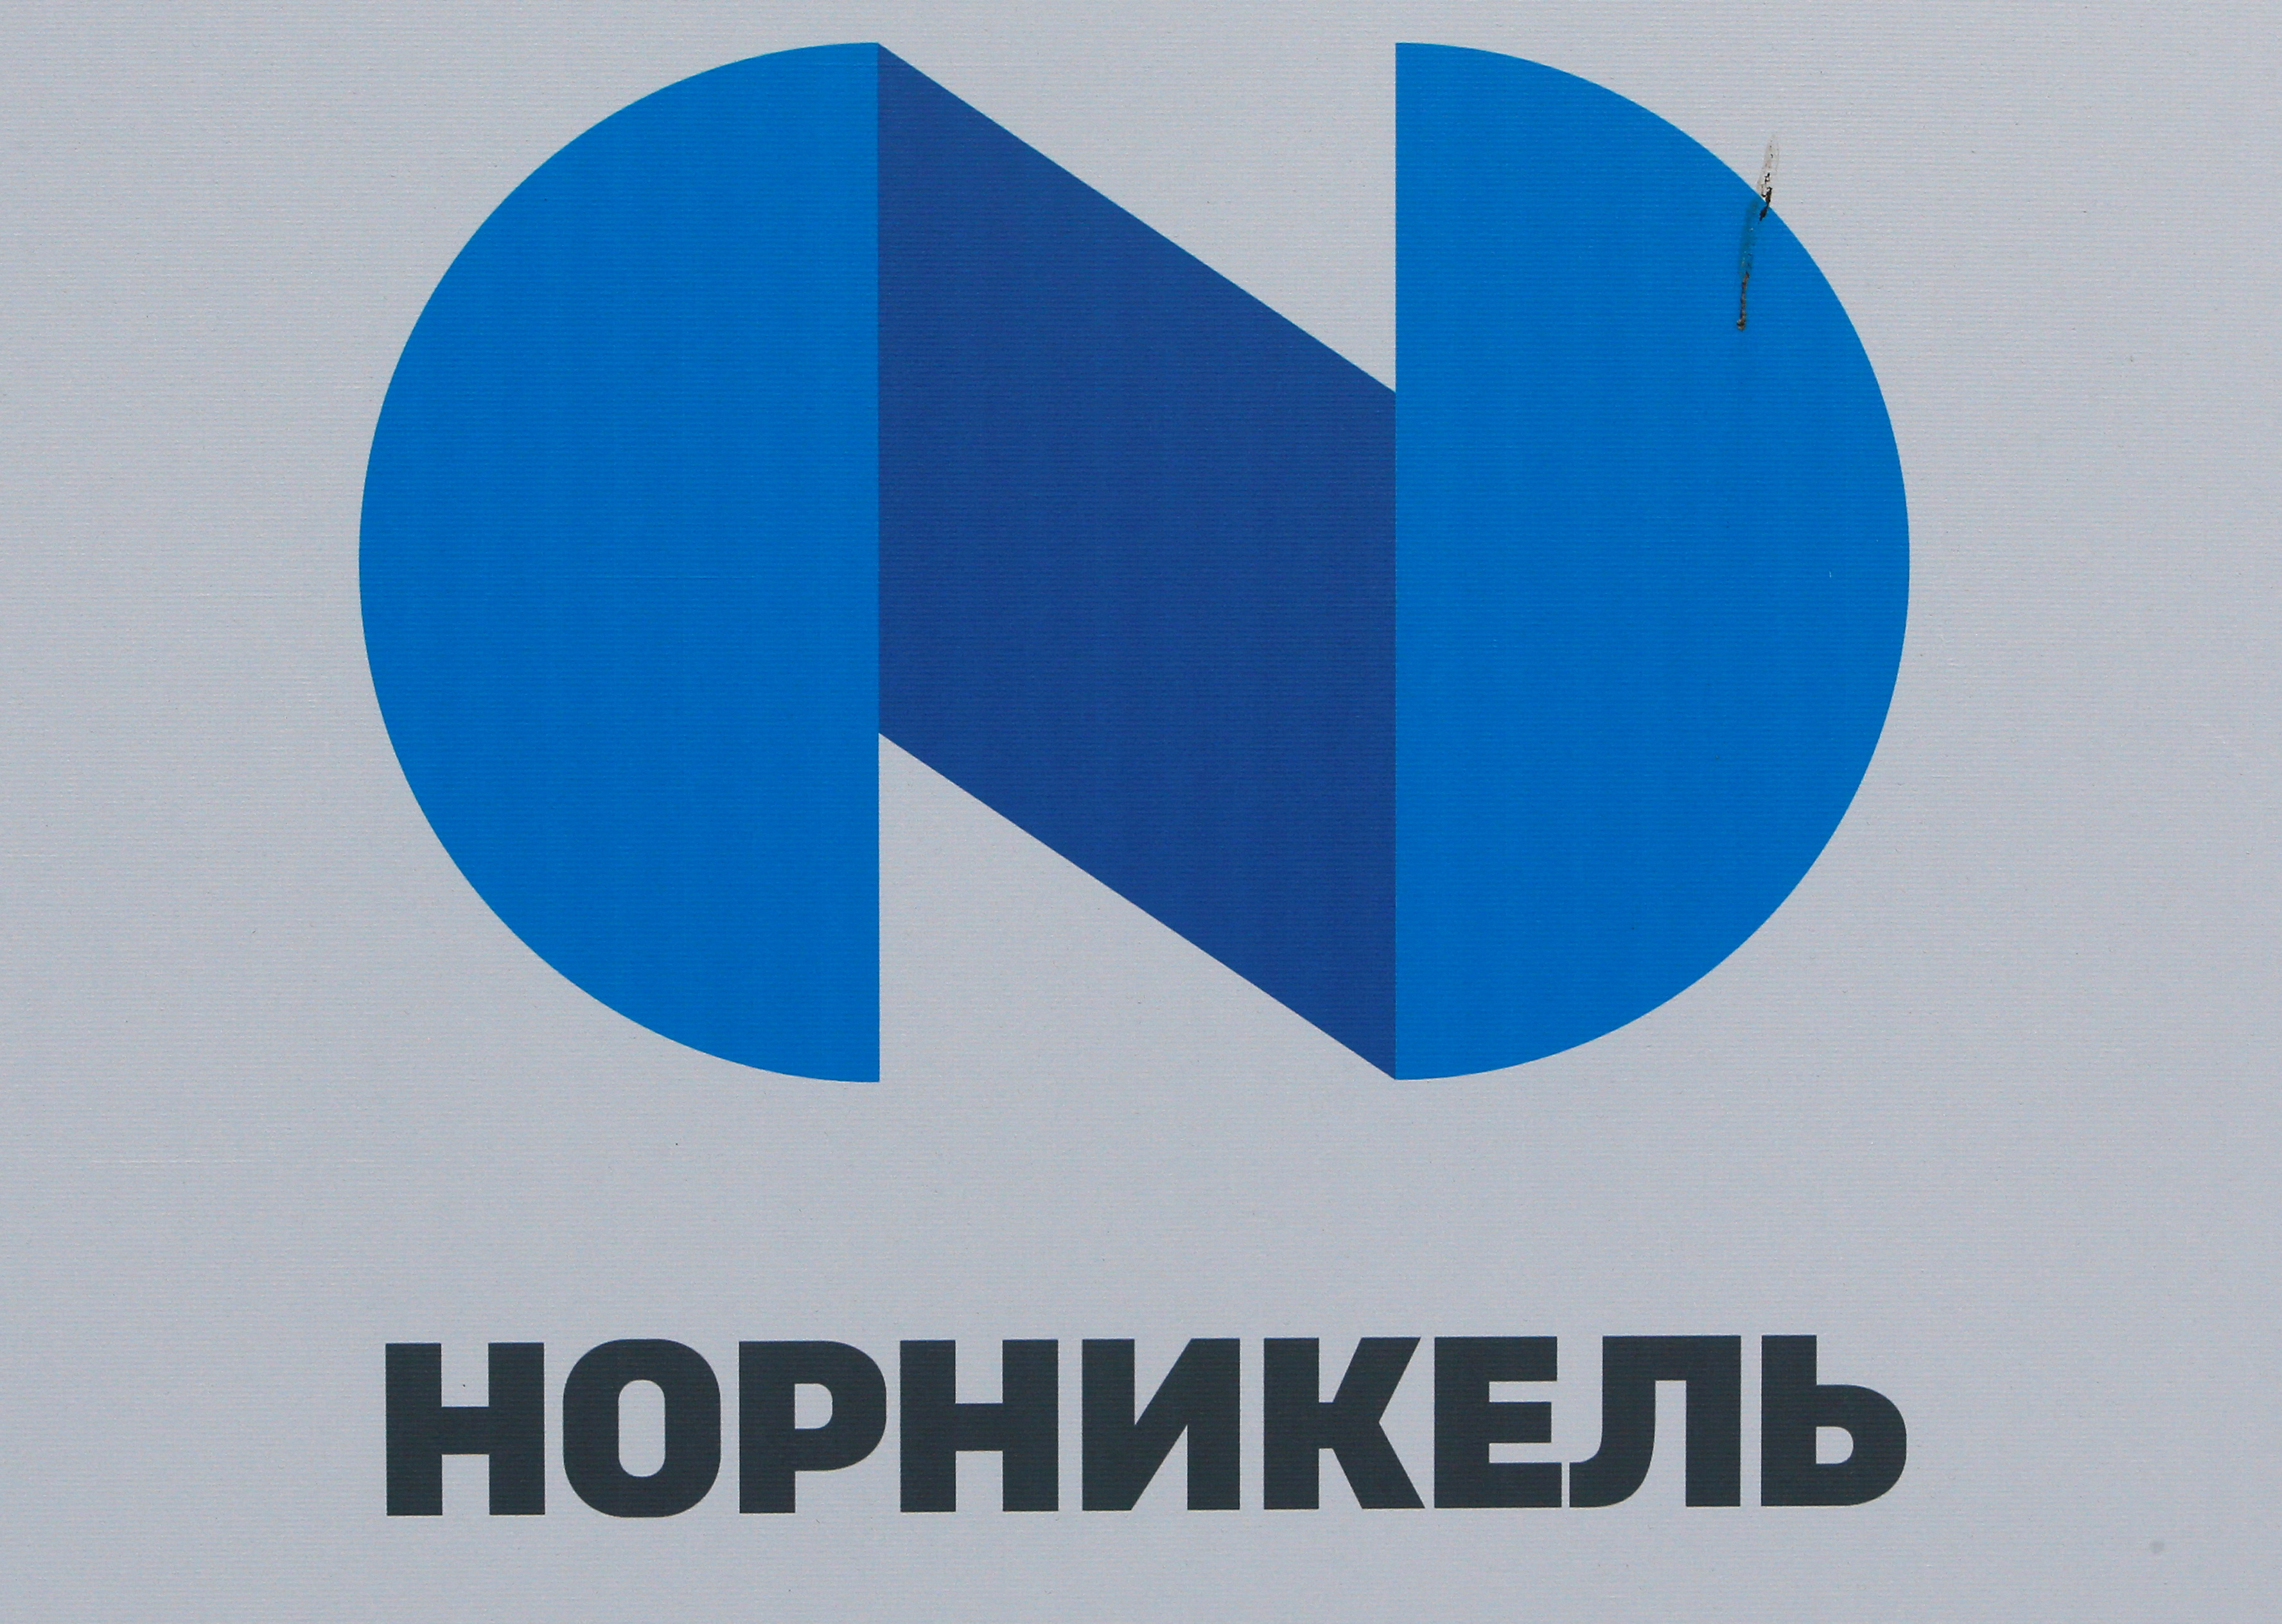 The logo of Russia's miner Nornickel is seen on a board at the SPIEF 2017 in St. Petersburg